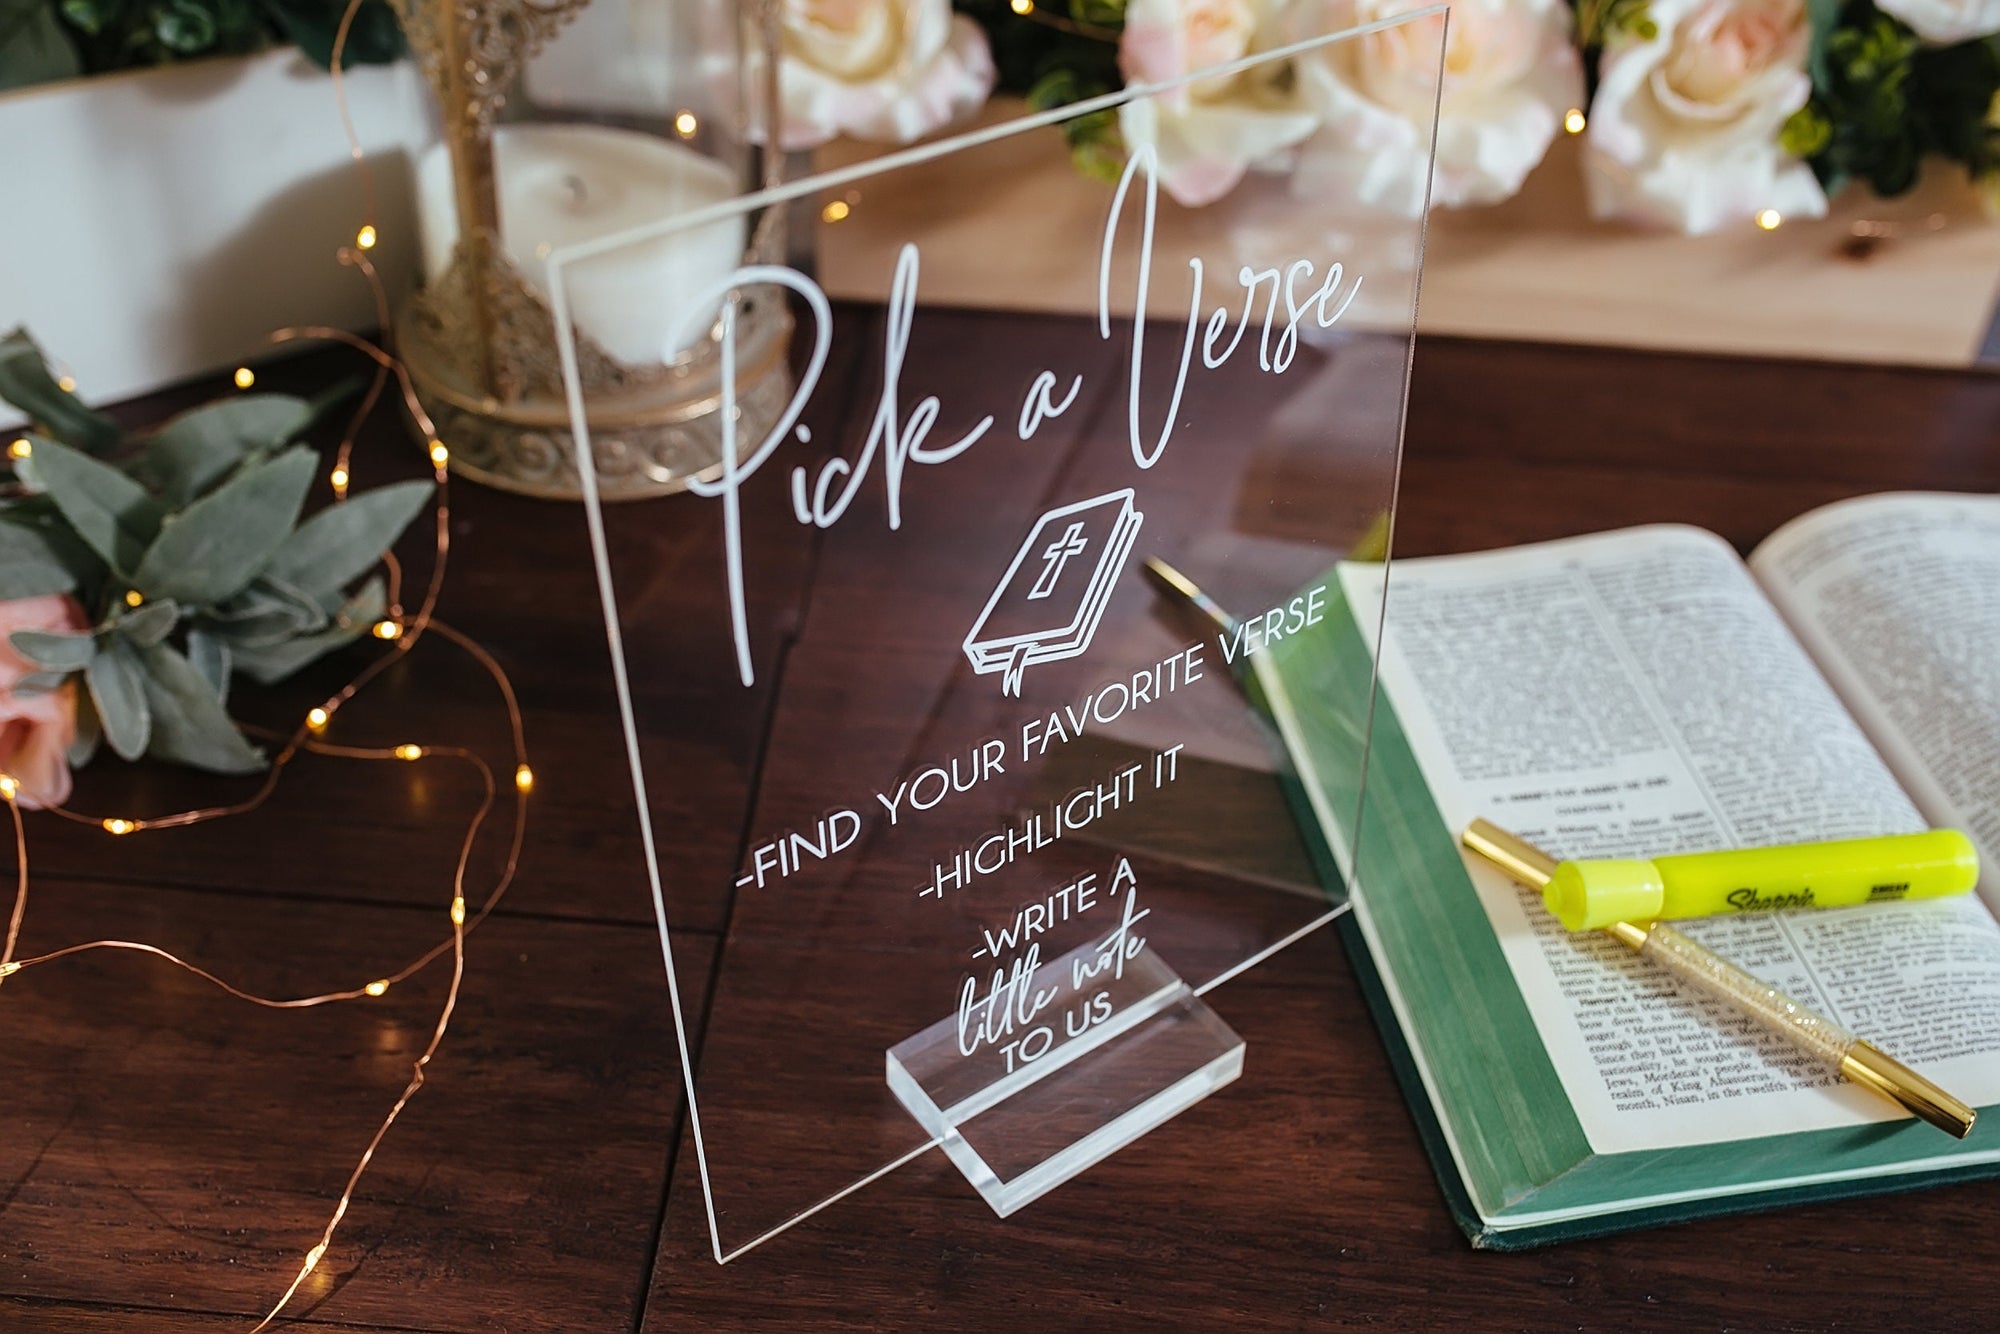 Pick Or Highlight Your Favorite Bible Verse Guestbook Clear Glass Look Acrylic Wedding Sign, Guest Book Plexiglass Perspex Lucite Table Sign